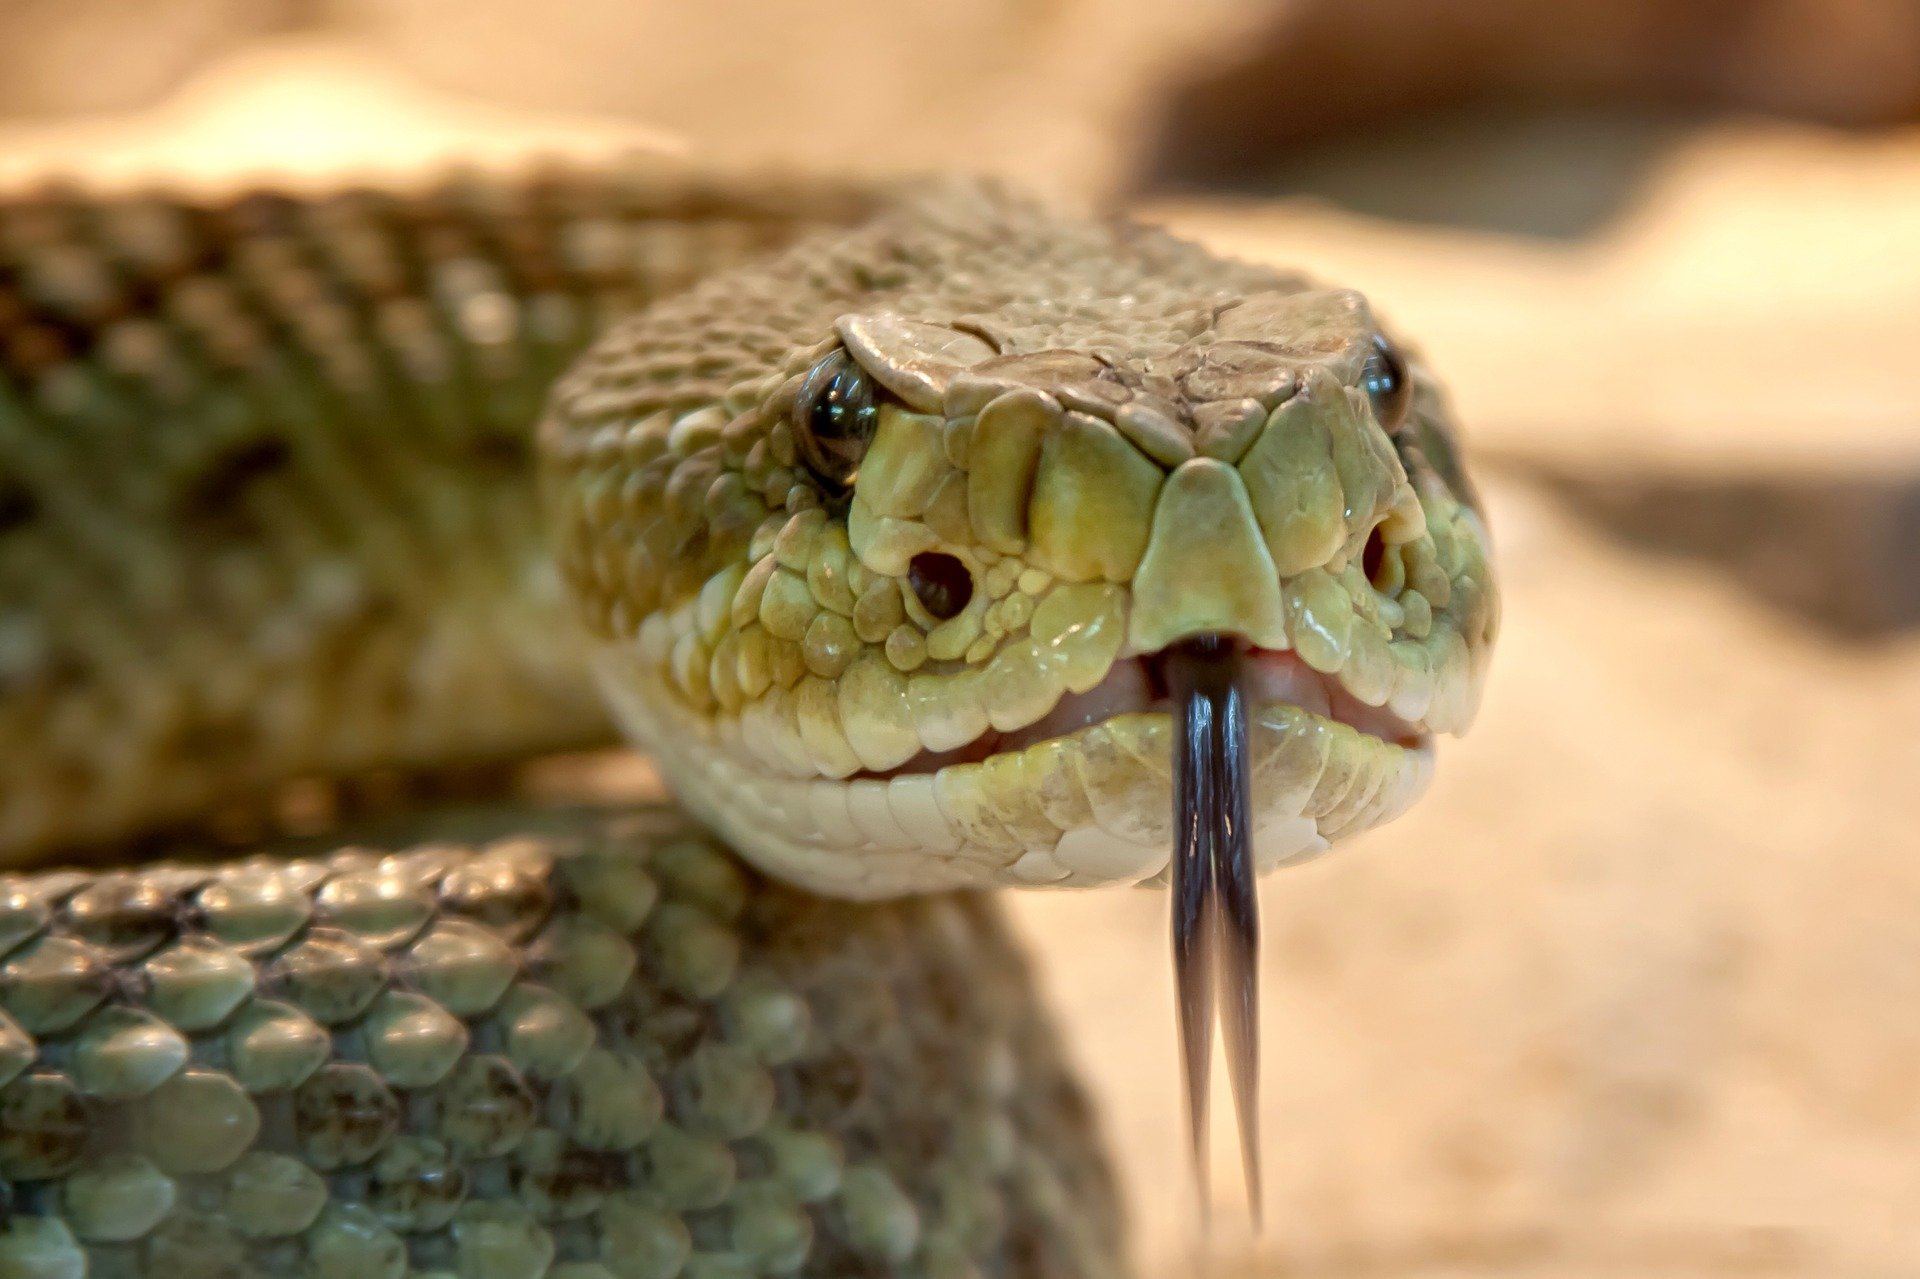 Snacking snakes act as 'ecosystem engineers' in seed dispersal